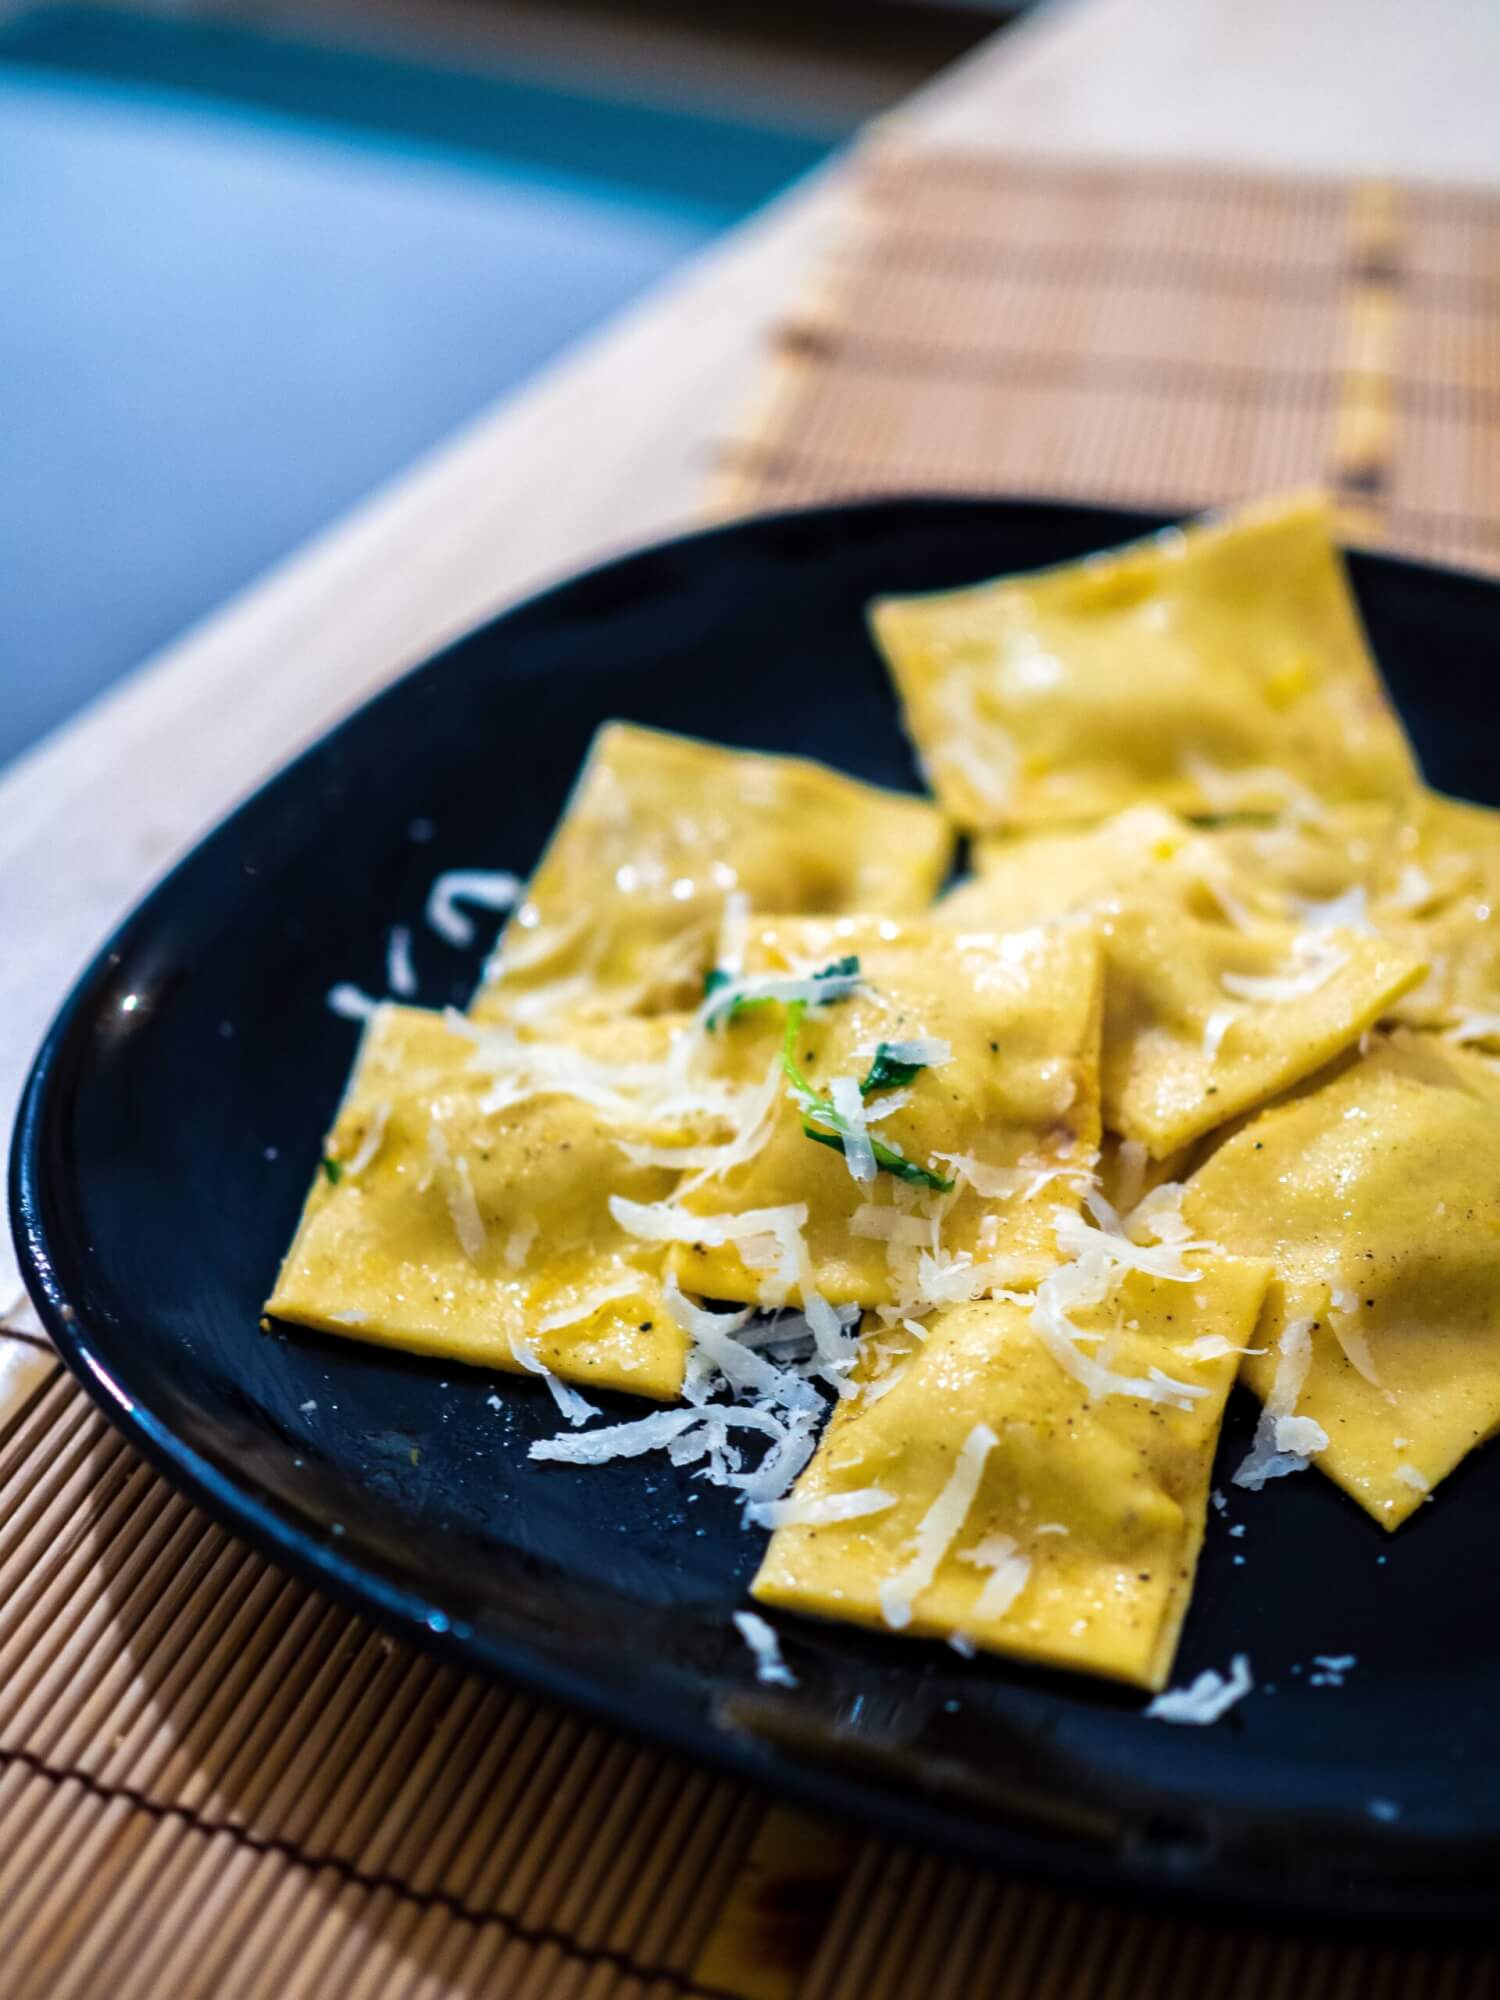 30+ Ravioli Filling Ideas & Recipes You Need to Make (Tried & Tested!)